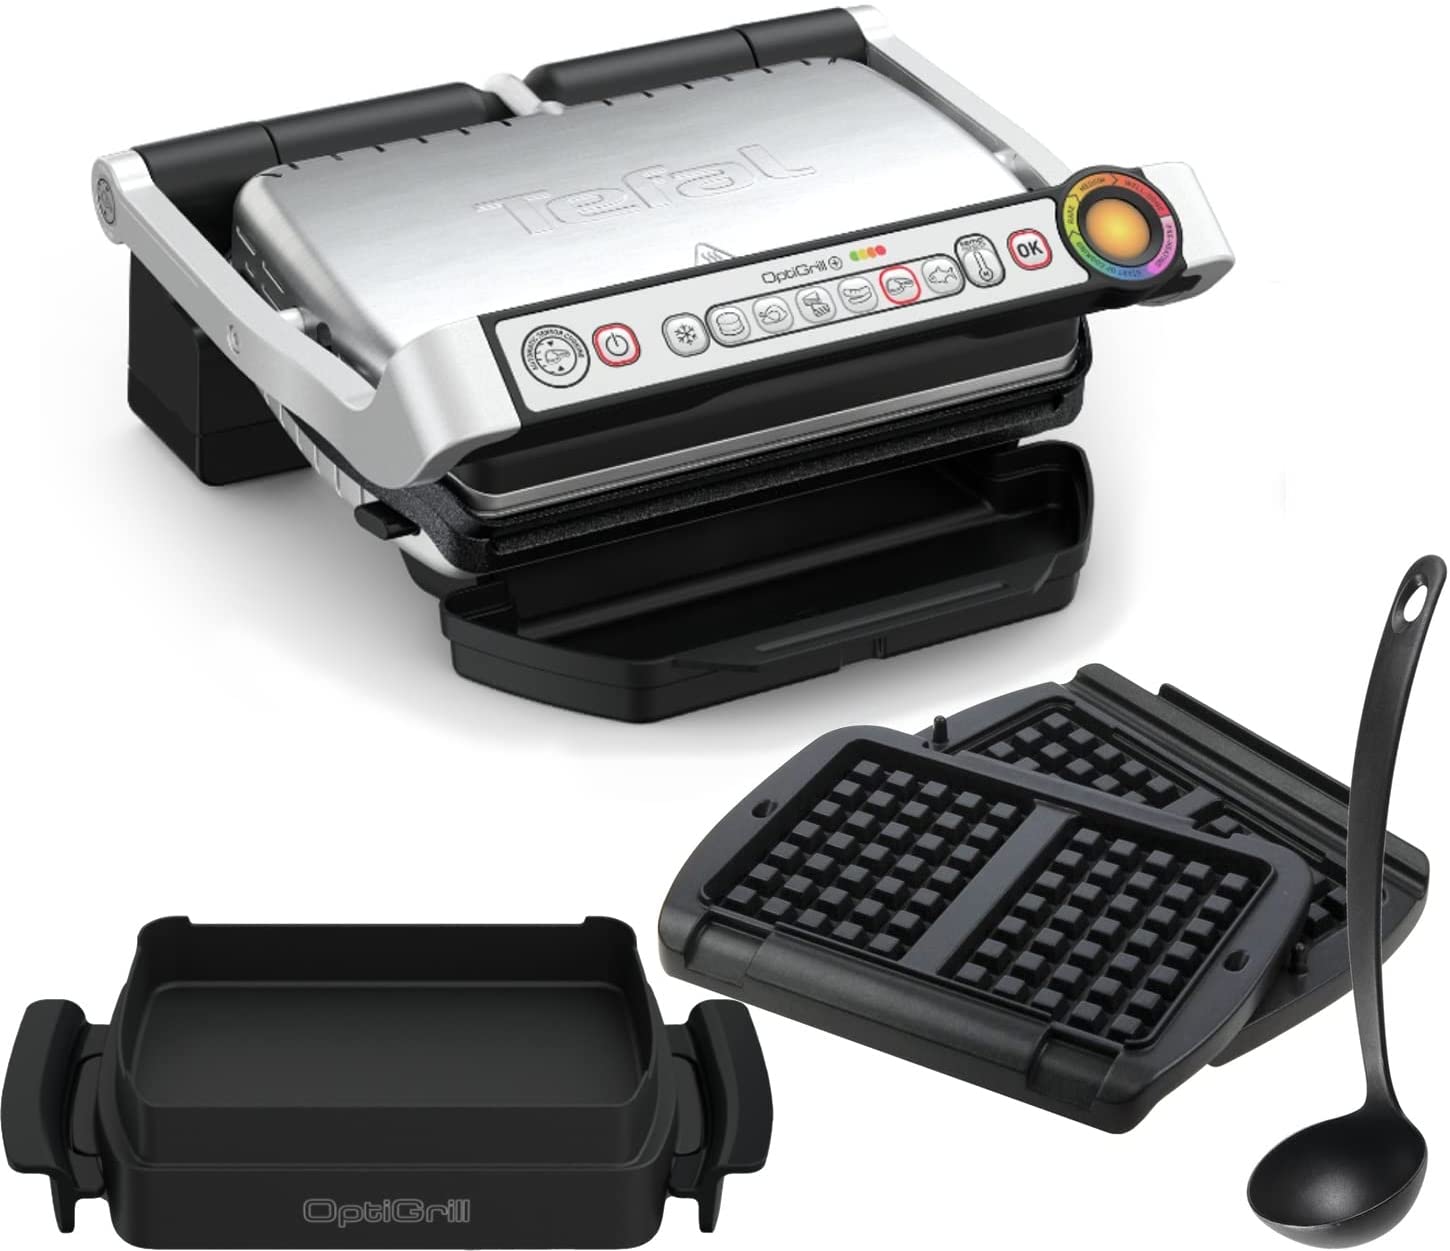 Tefal OptiGrill+ Electric Contact Grill + XA7238 Waffle Plates, Ladle XA7258 Snacking & Baking Baking Tray, 6 Grill Programs, Stainless Steel